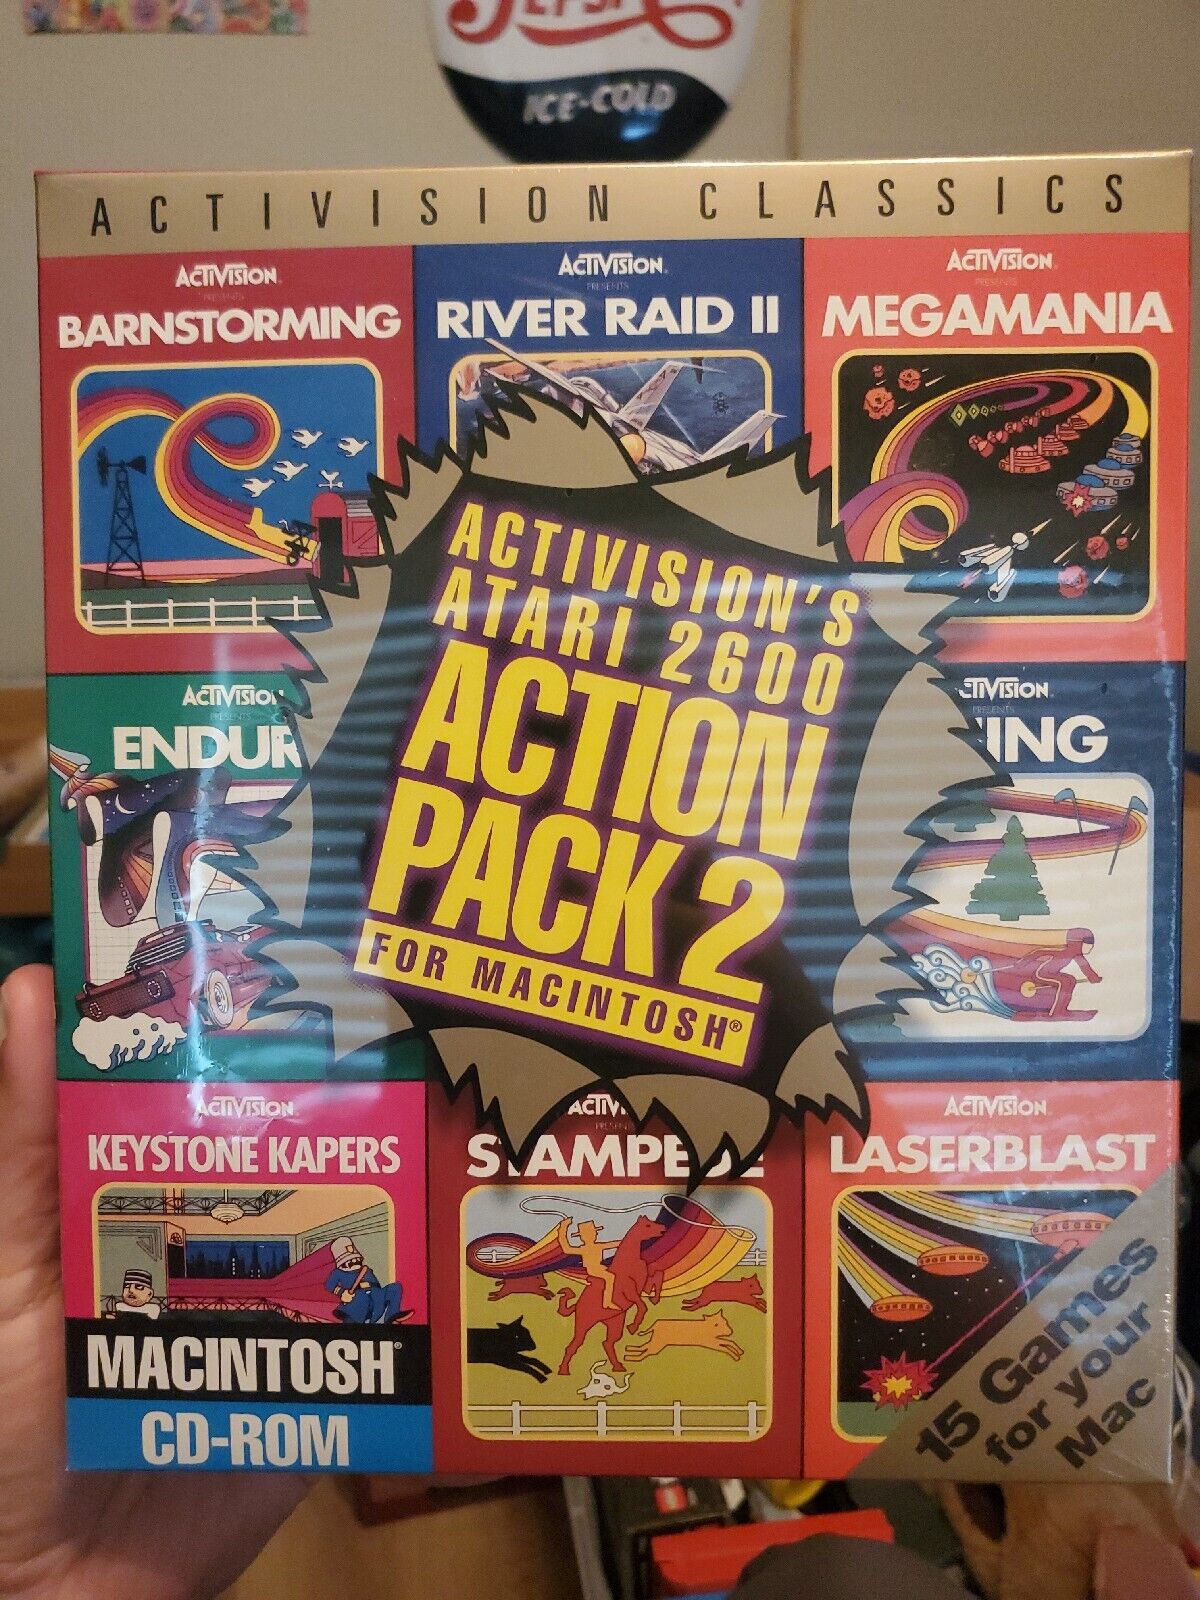 Activision’s Atari 2600 Action Pack 2 For Macintosh Factory Sealed 